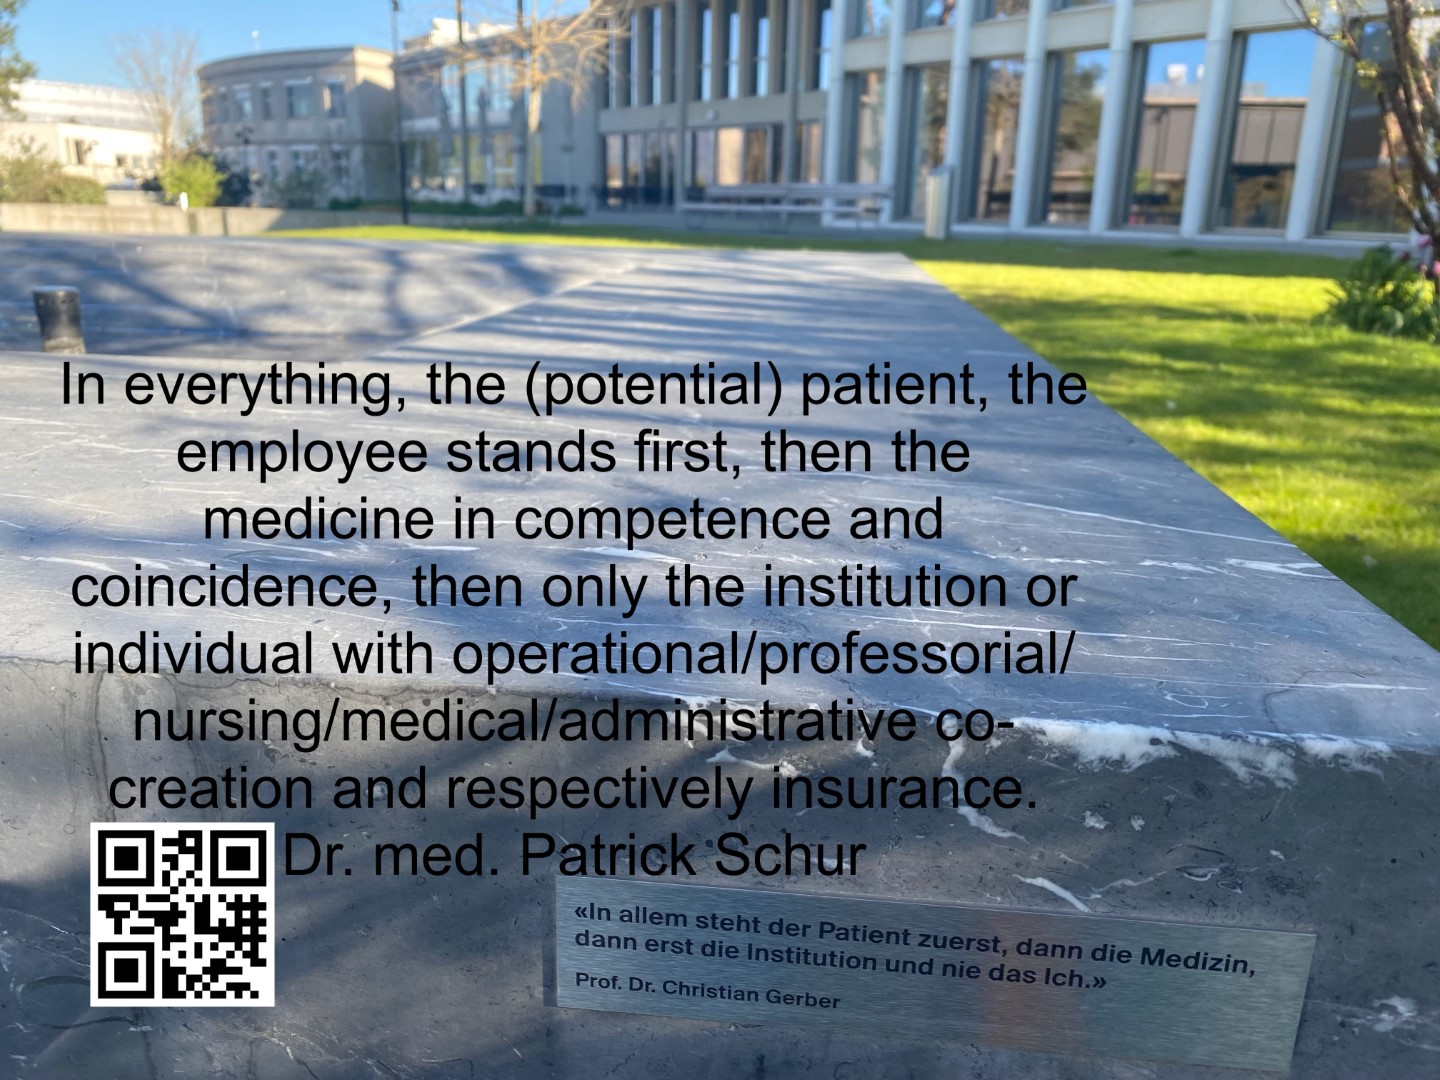 Ethical (Digital) Supply Chain Ideology in Healthcare - by Dr. med. Patrick Schur.ch